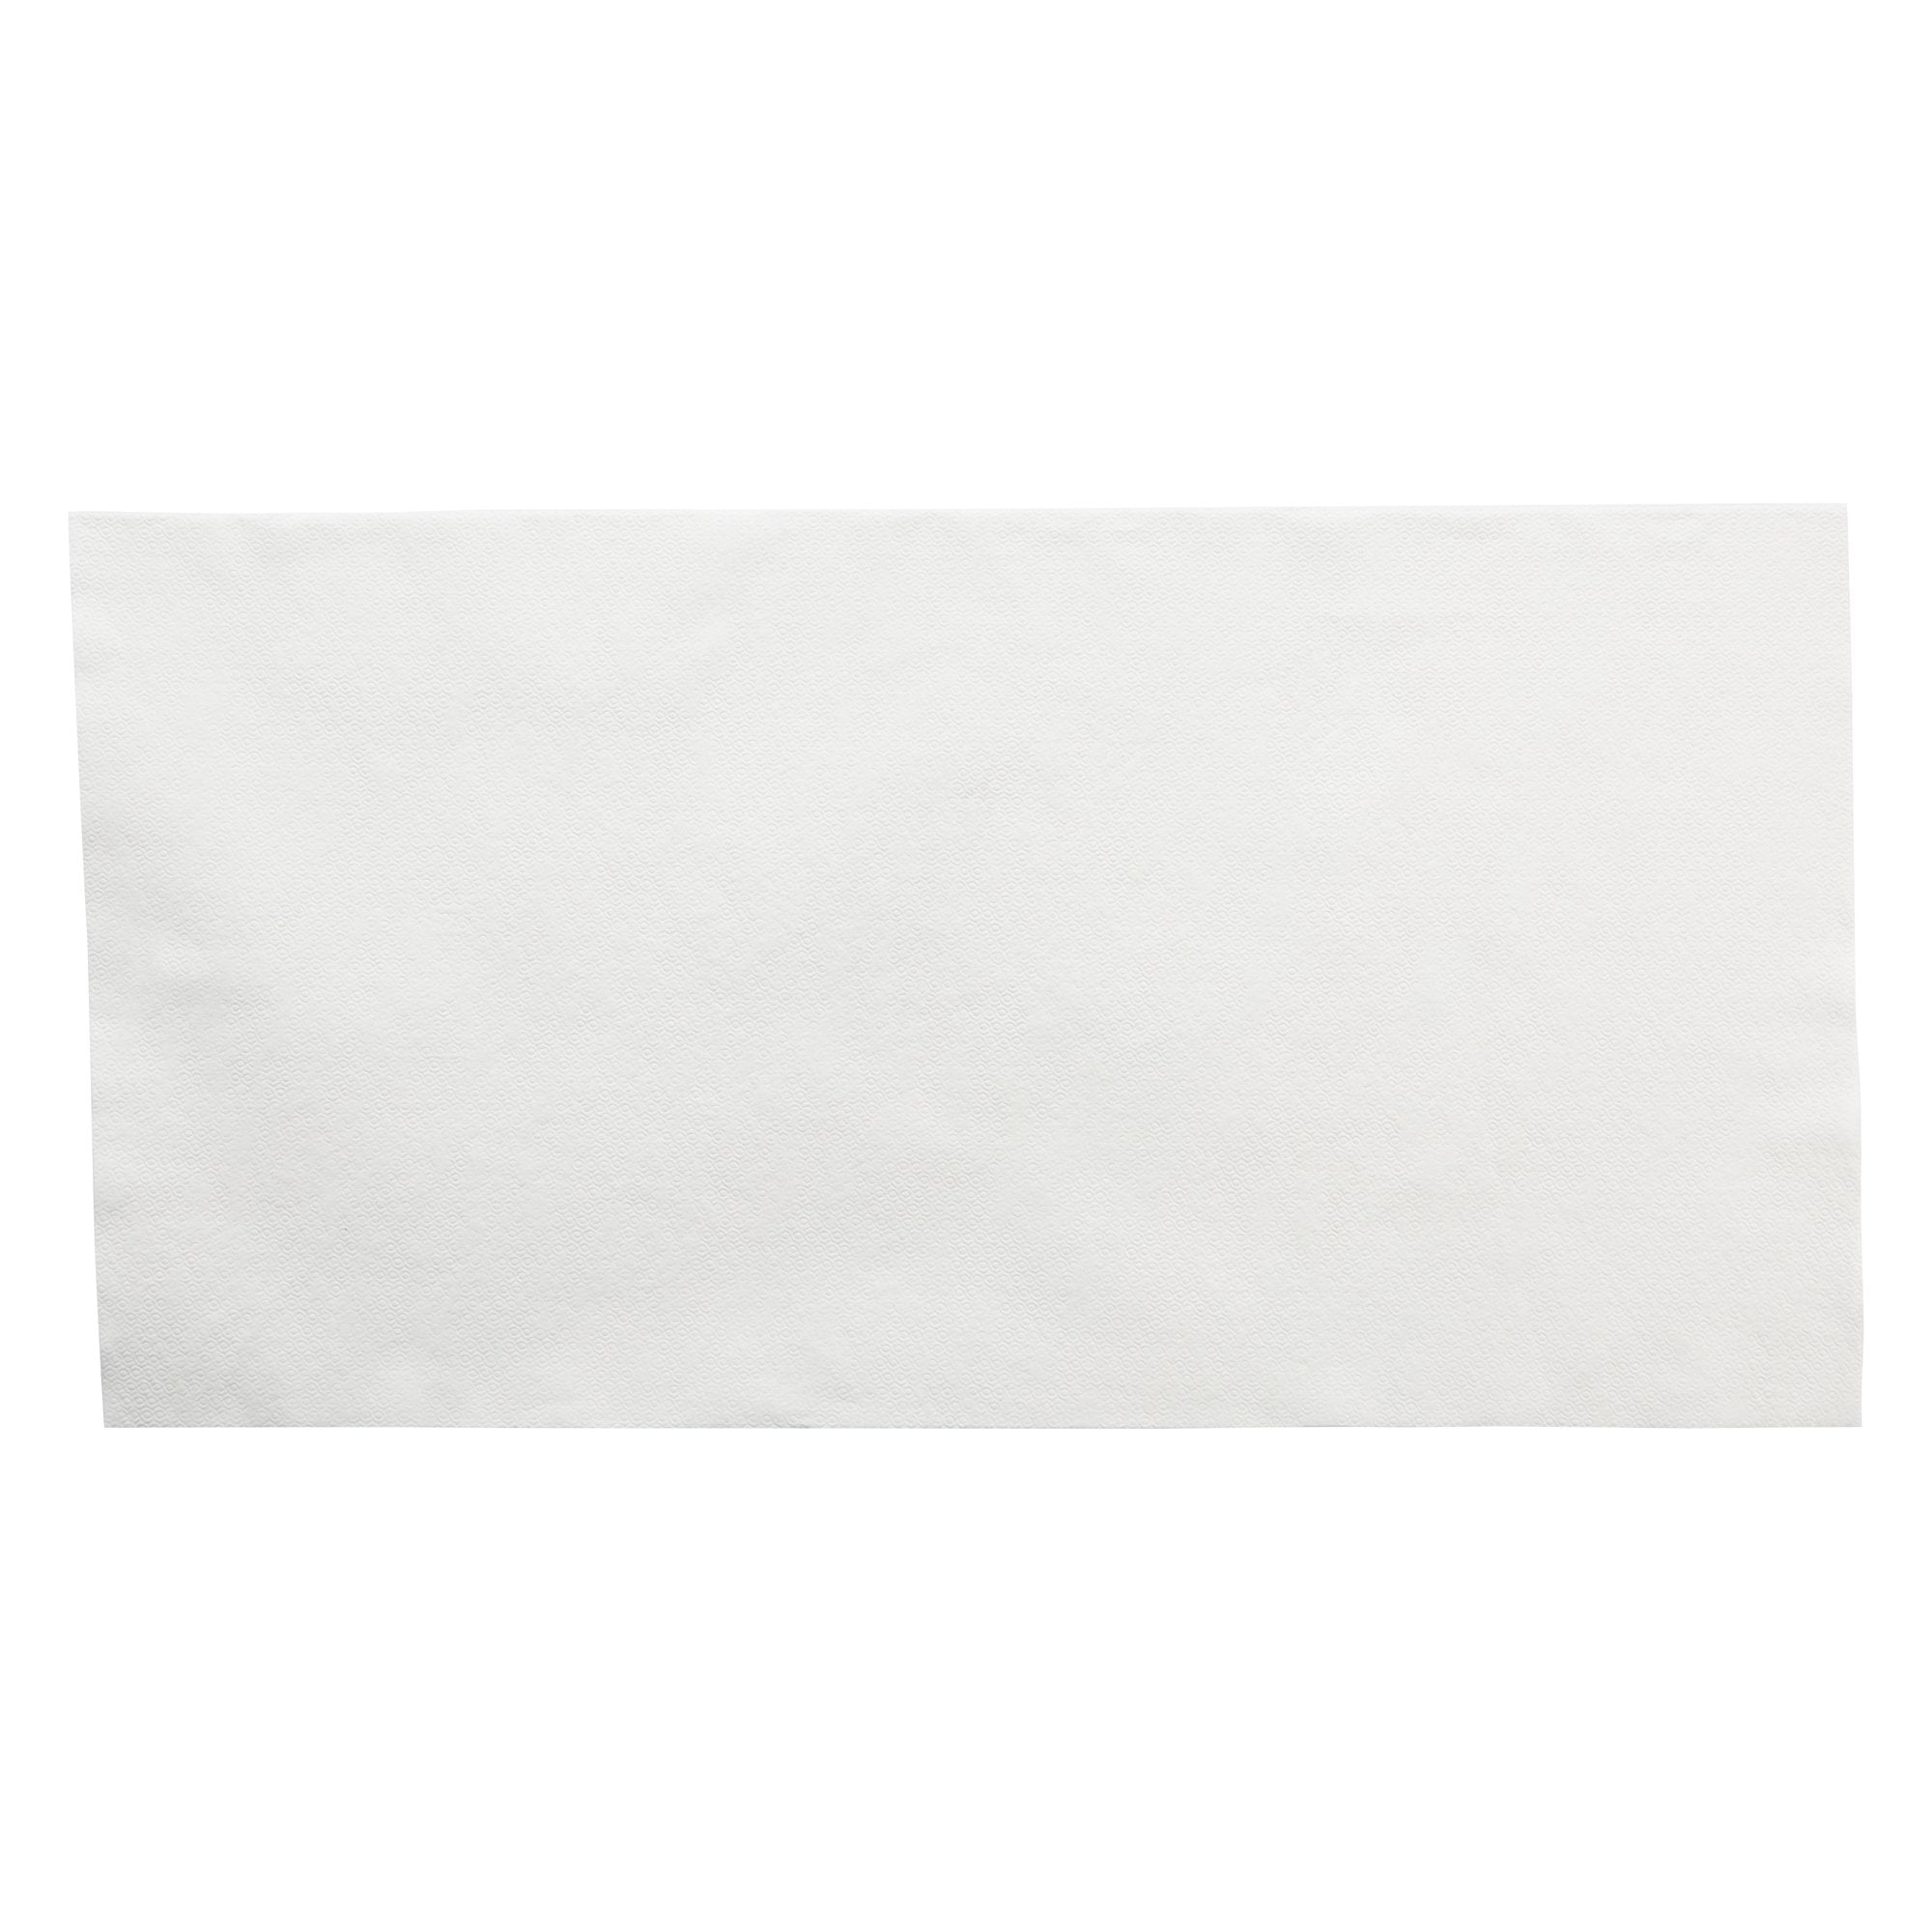 Bath Towel Pacific Blue Select™ A300 19-1/2 X 39 Inch Airlaid Bonded Cellulose White Disposable